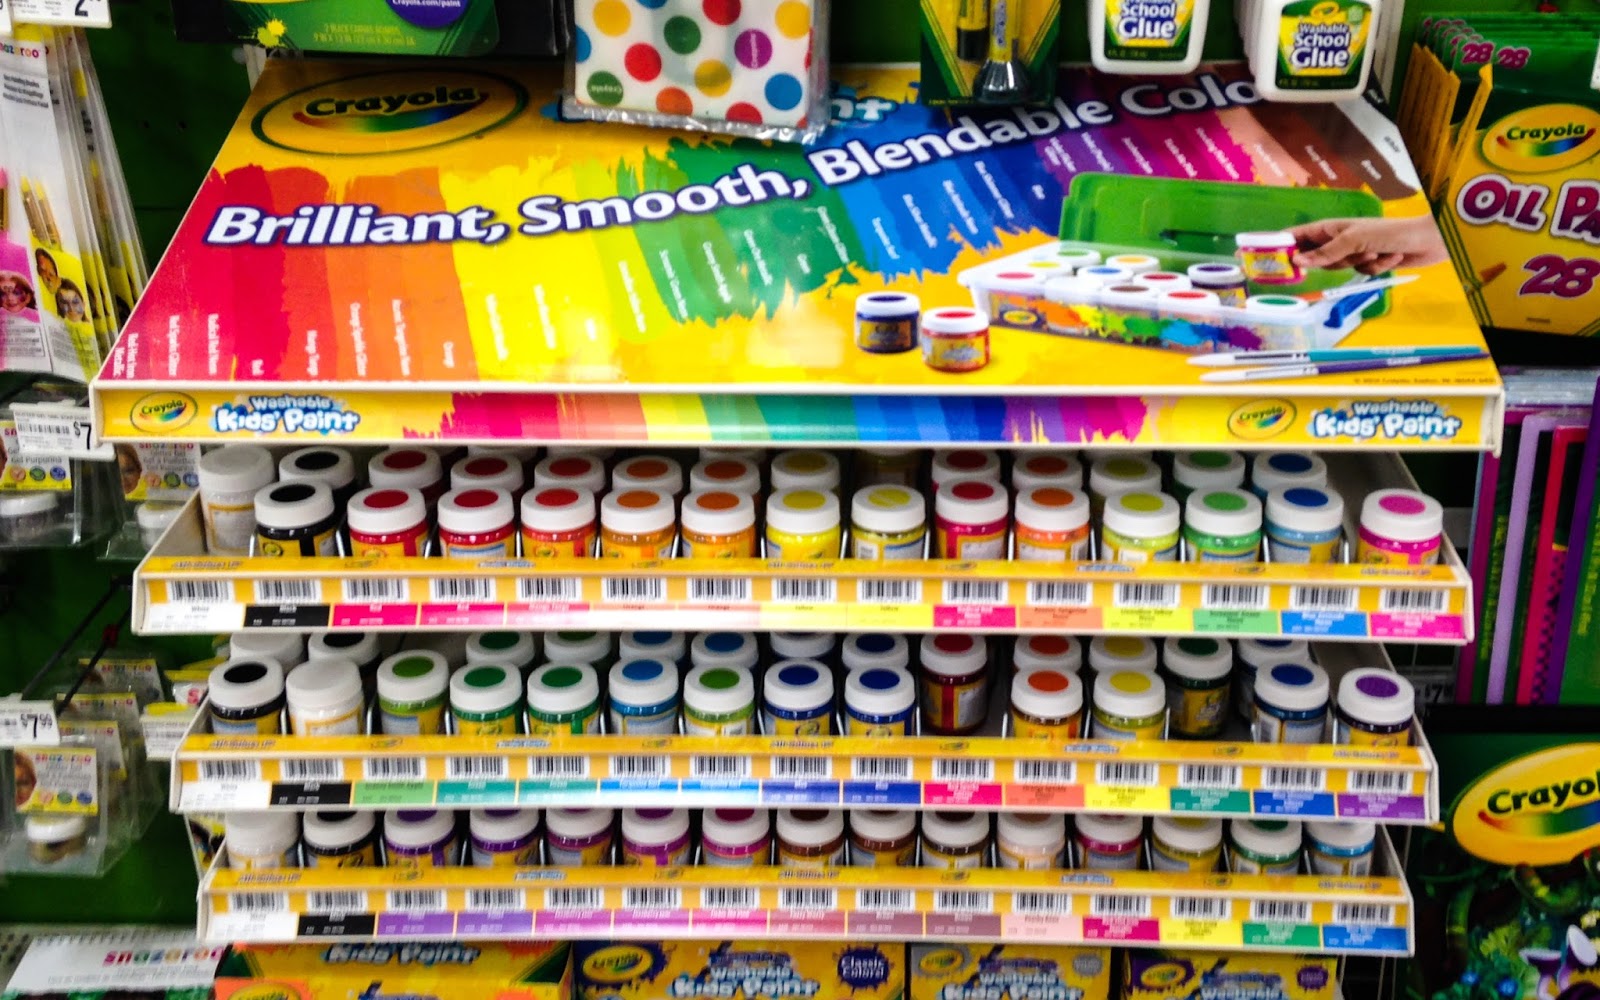 Crayola Washable Kids Paint: What's Inside the Box